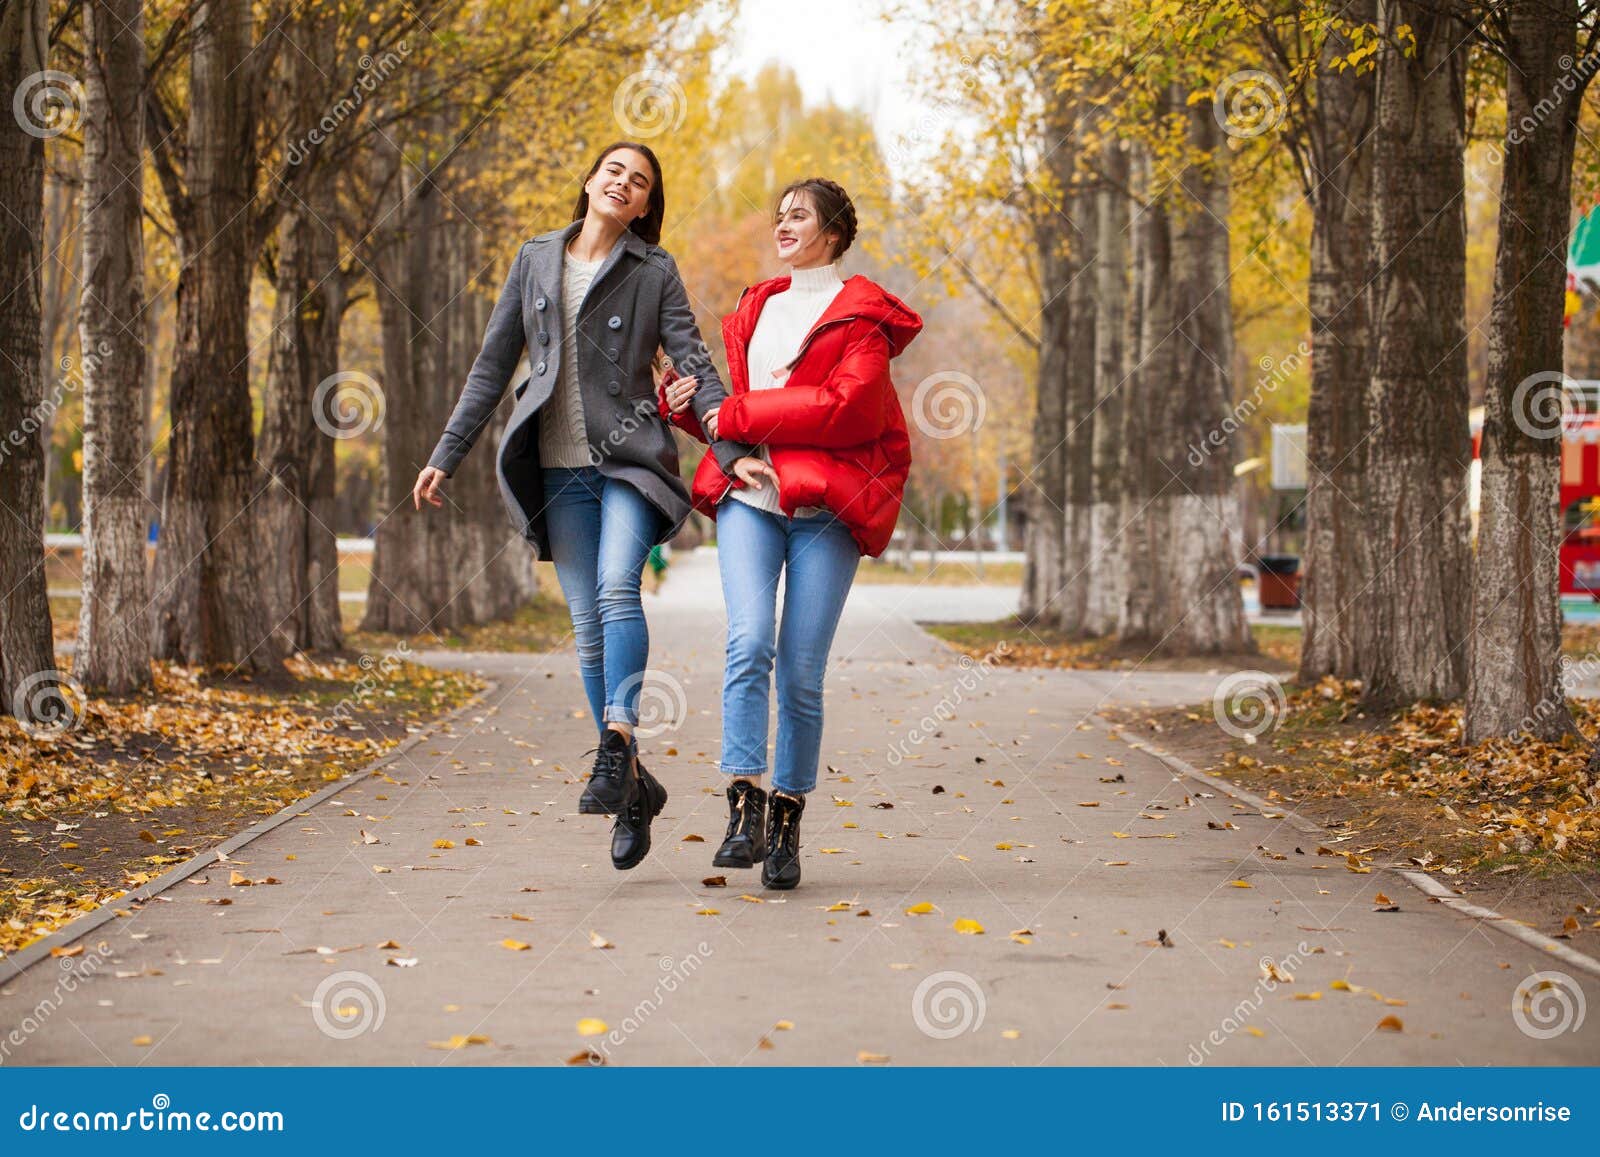 Two Girlfriends in a Gray Wool Coat and a Red Down Jacket Stock Image ...